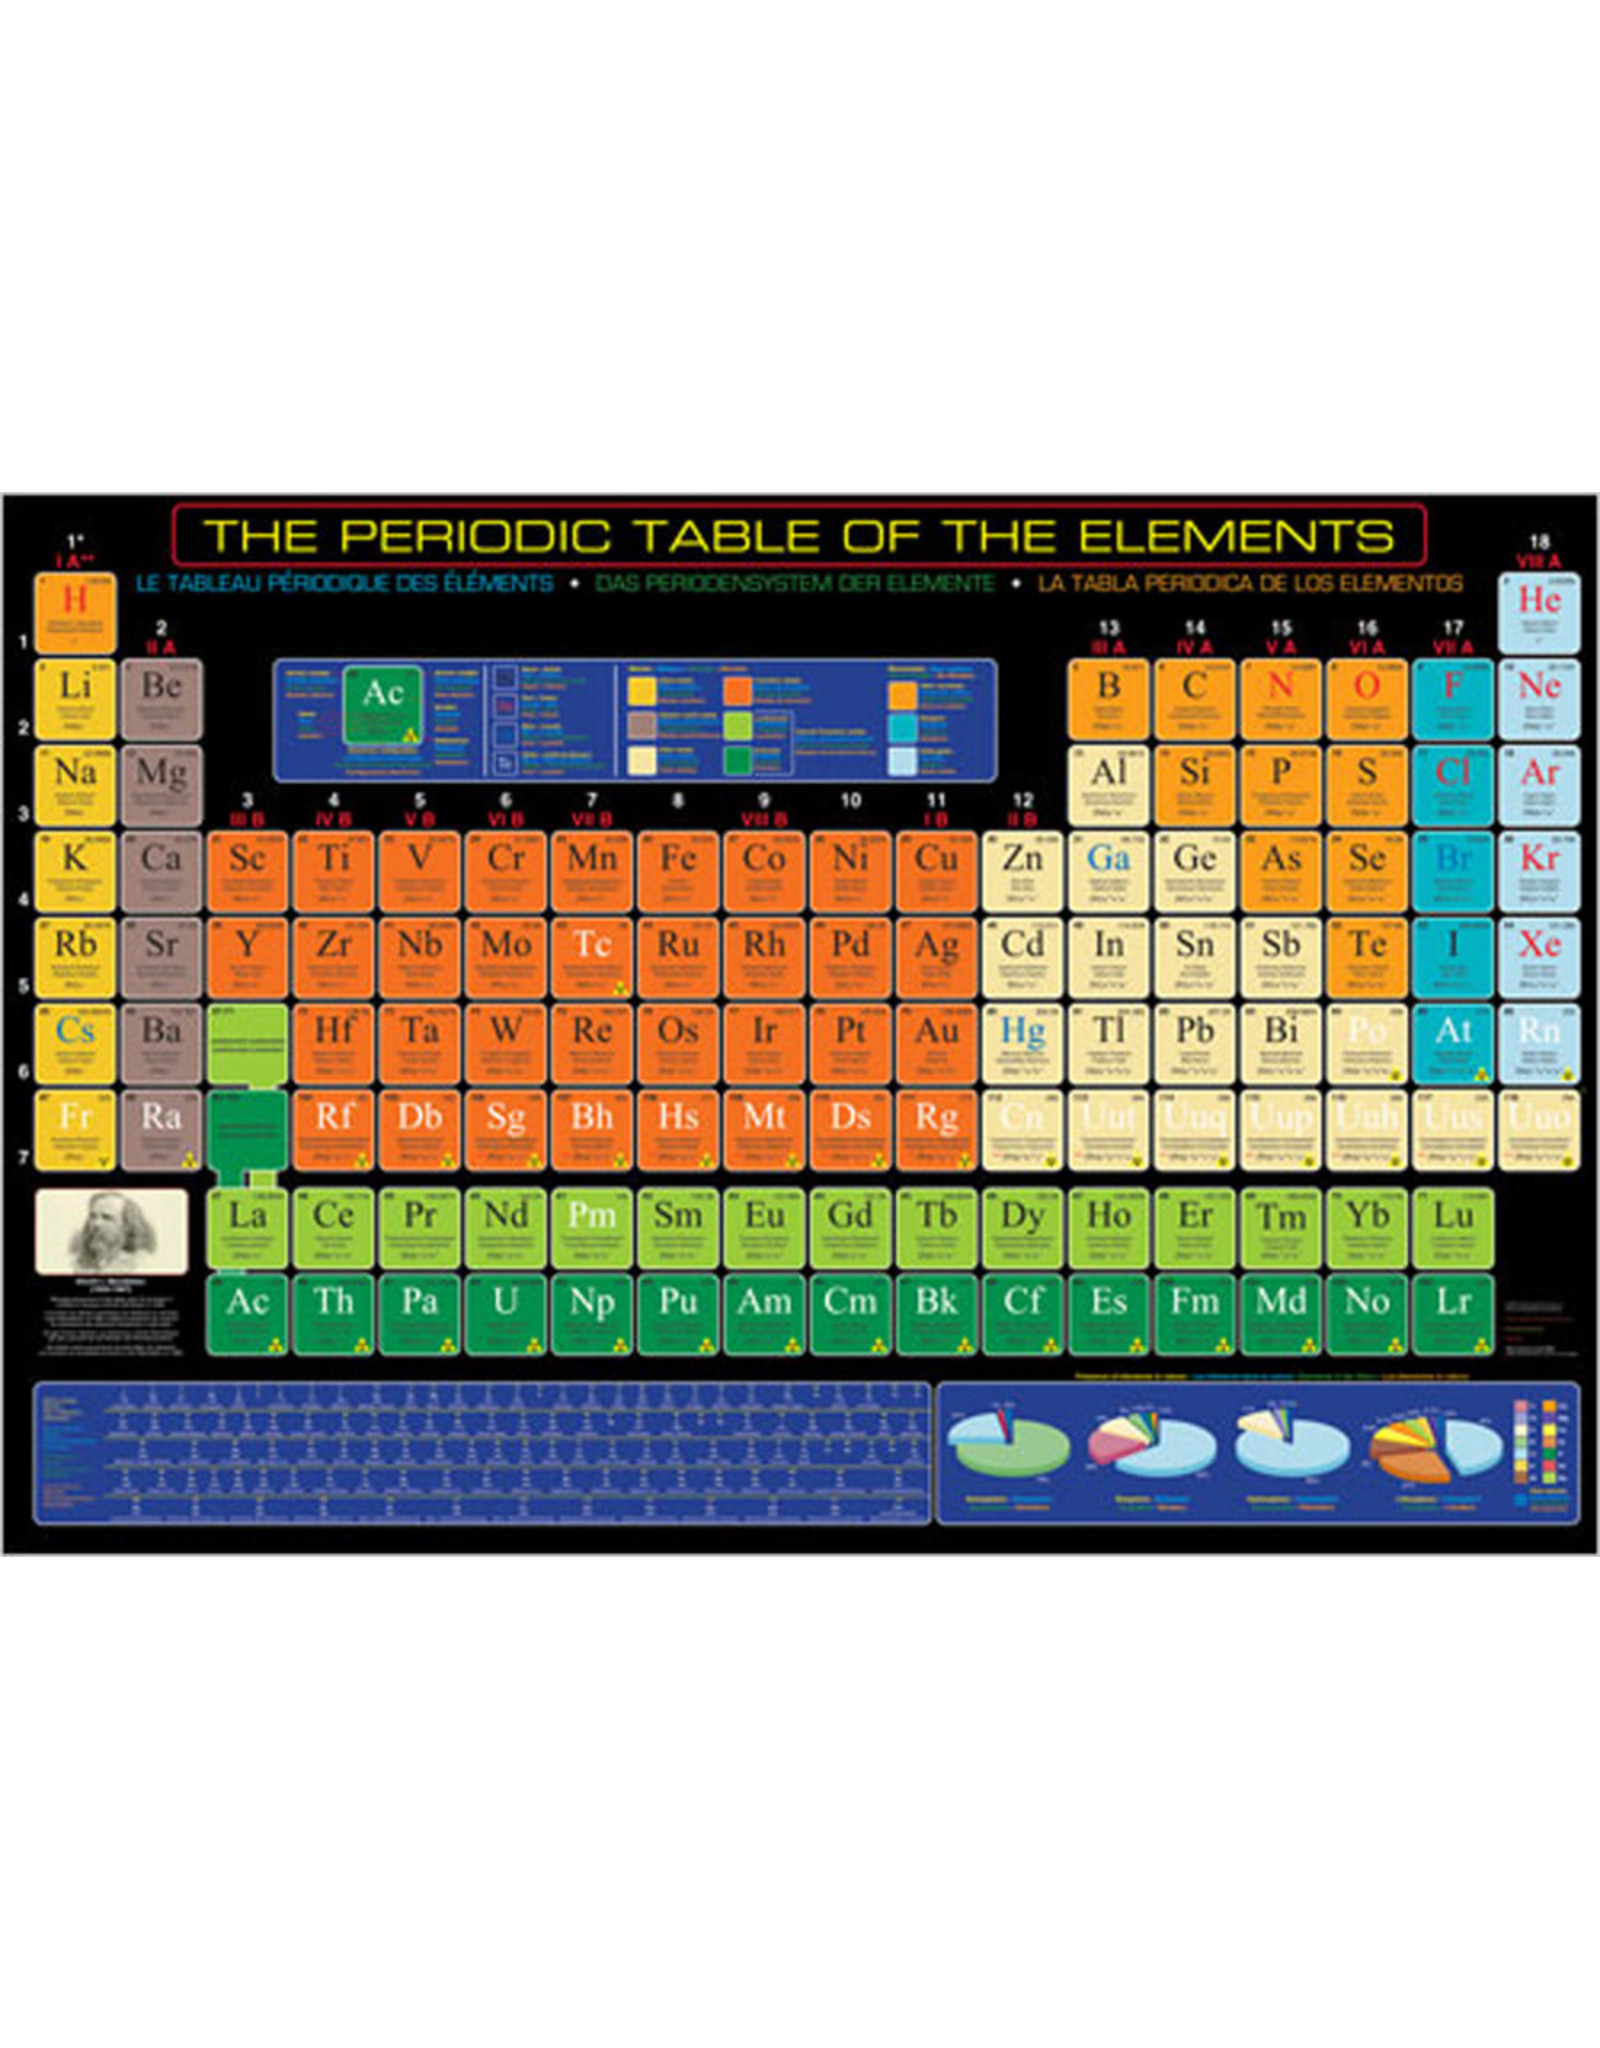 Eurographics The Periodic Table of the Elements - Poster